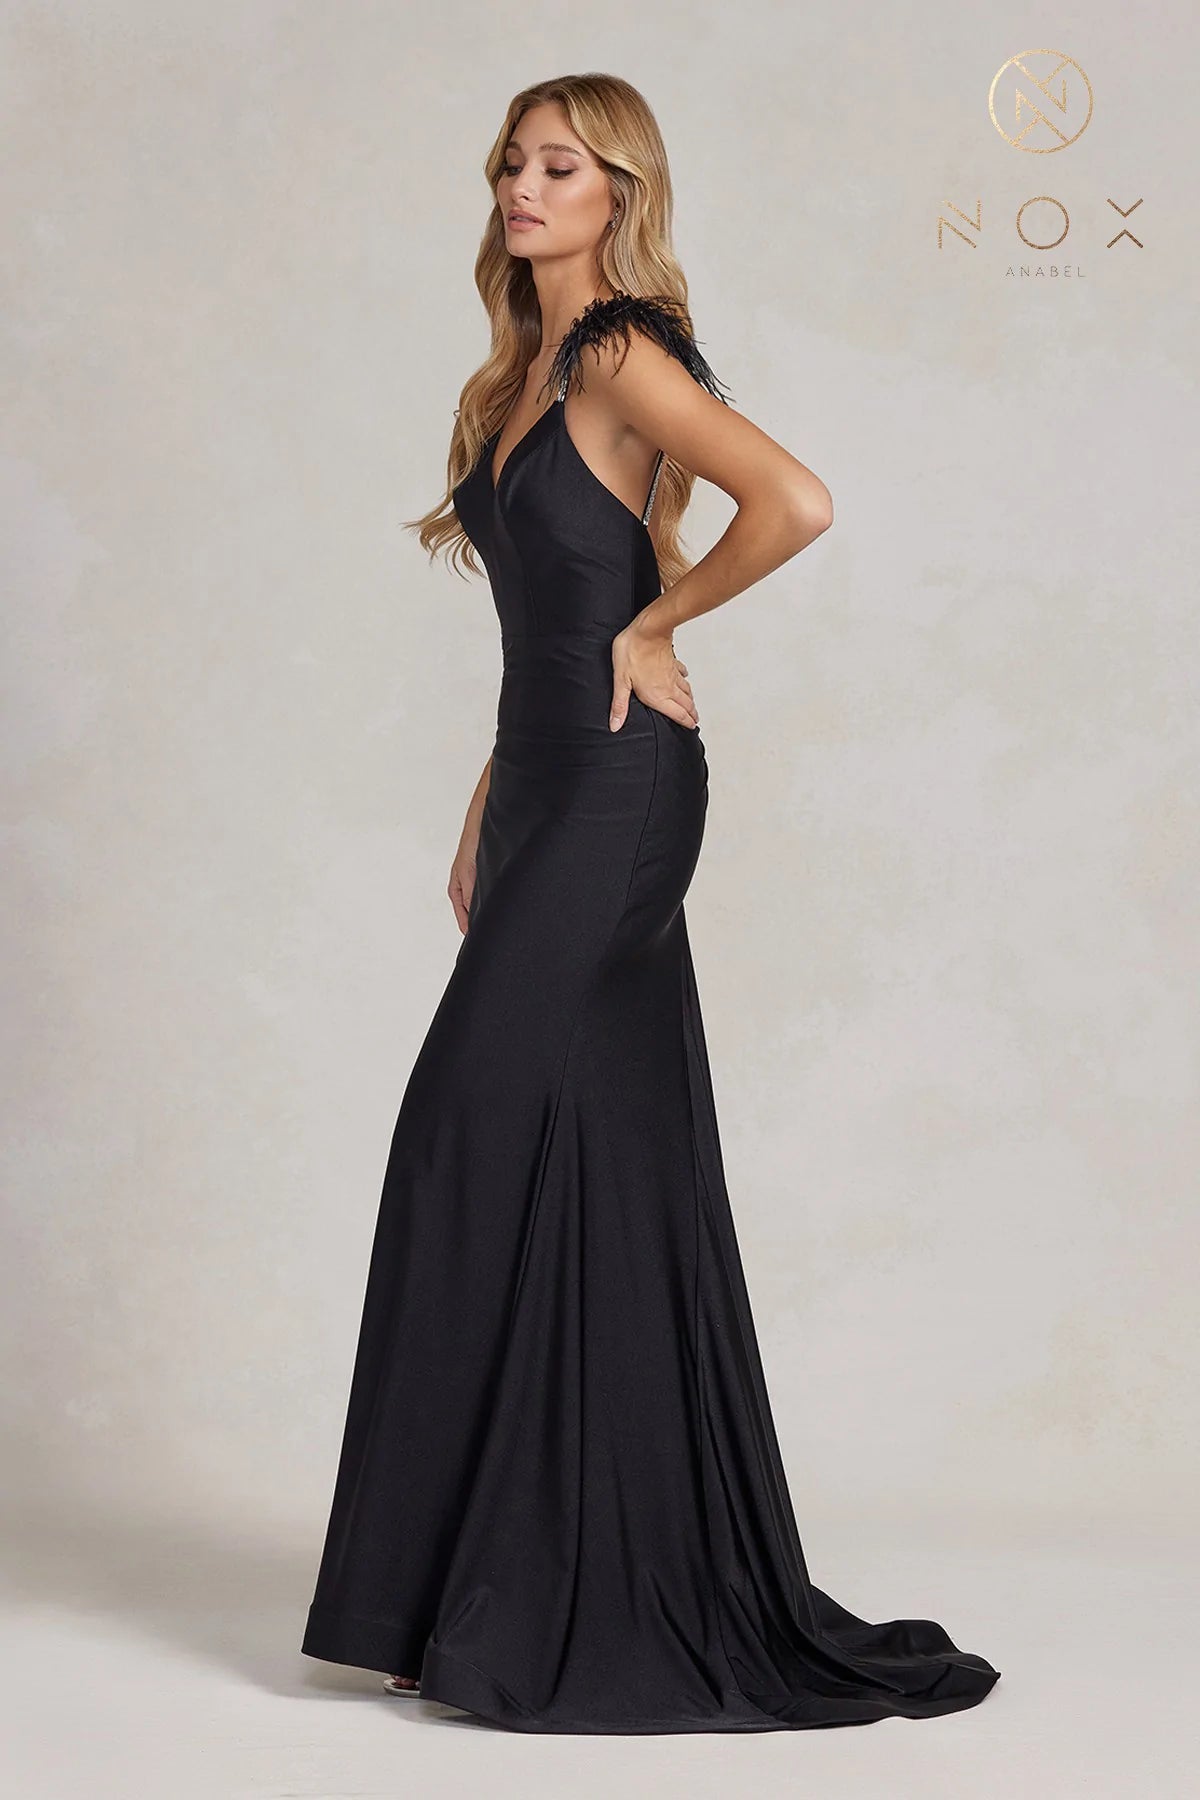 Nox Anabel T1138 Long Fitted Jersey Feather Prom Dress Ruched V Neck Formal Gown  Sizes: 00-16  Colors: Black, Neon Orange, Red